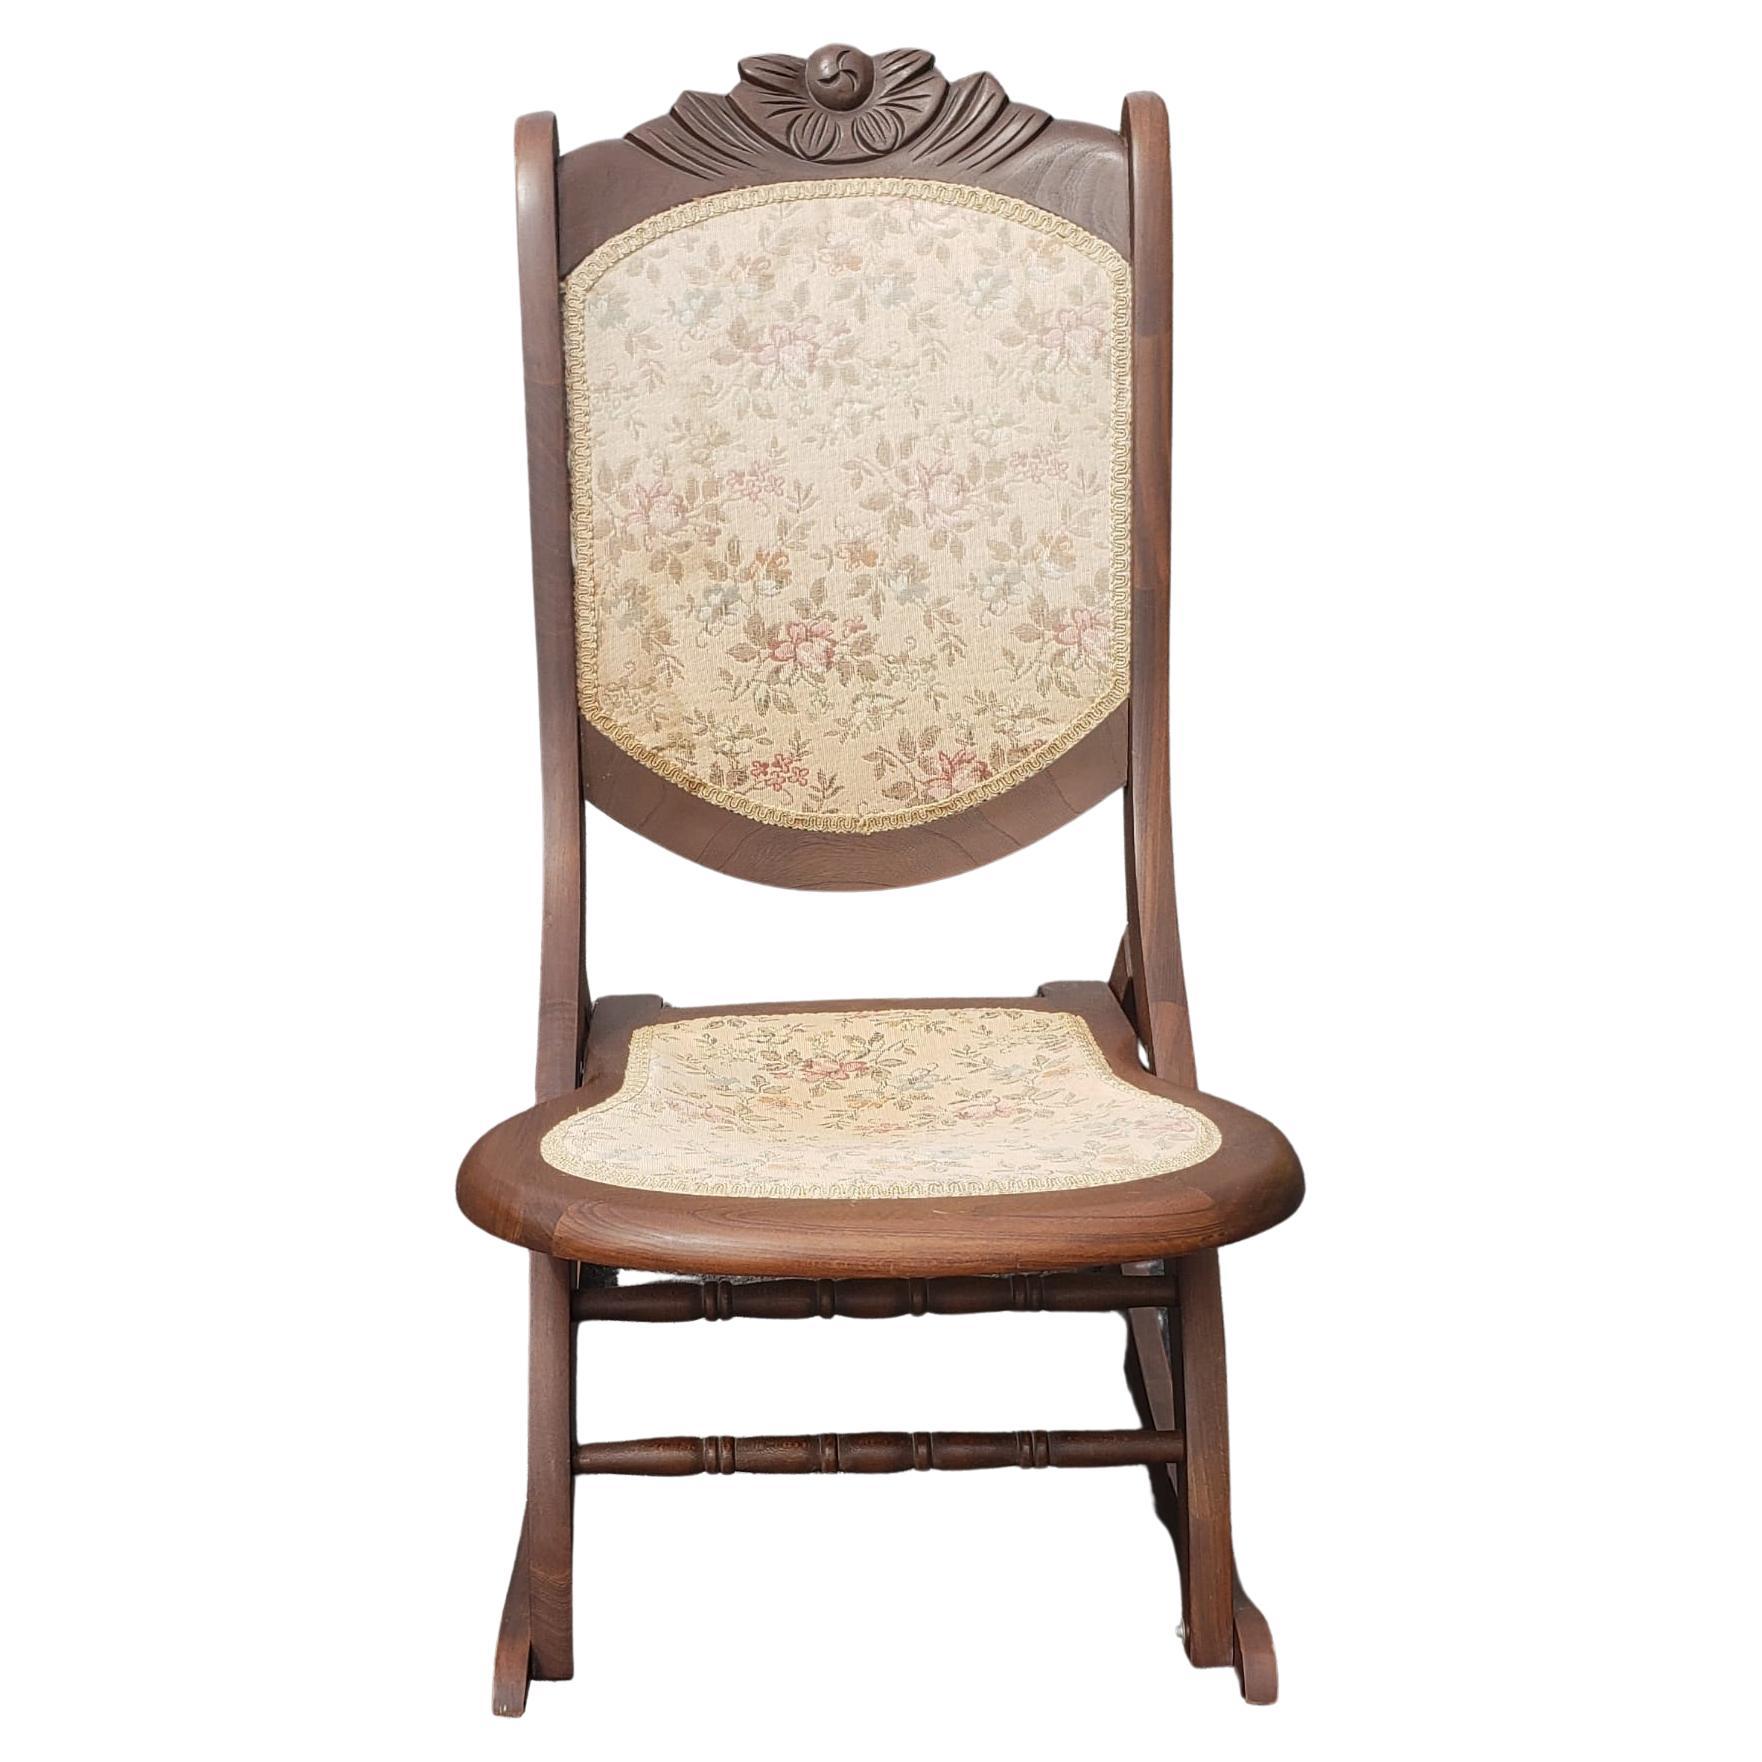 Early 20th Century Carved Walnut and Upholstered Folding Rocking Chair